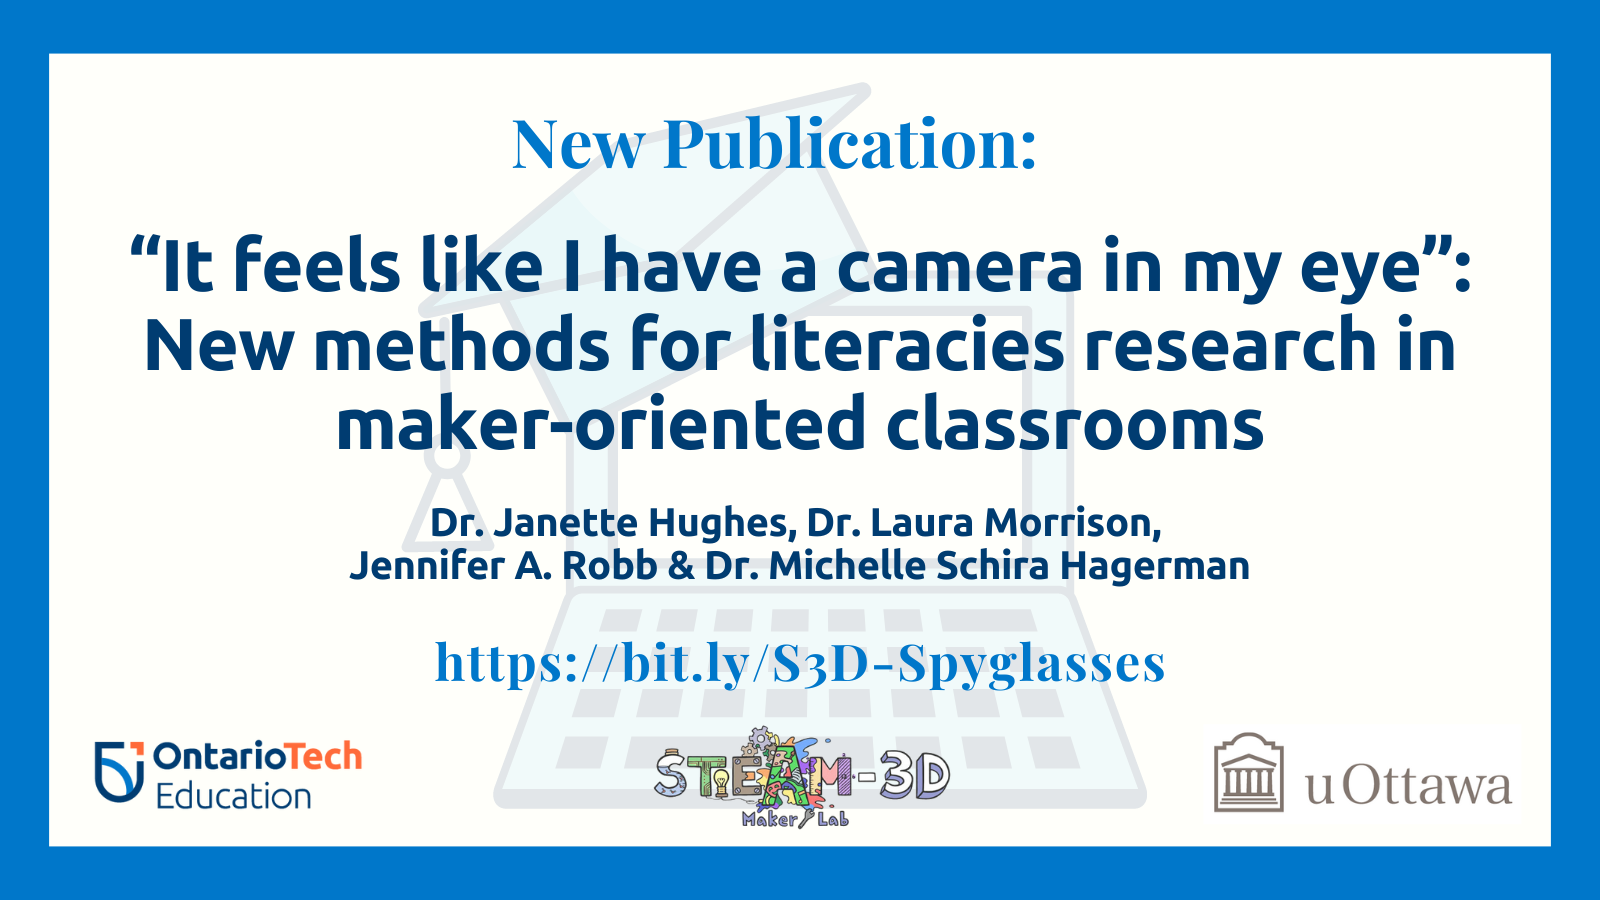 Text-based image that reads "New publication: 'It feels like I have a camera in my eye': New methods for literacies research in maker-oriented classrooms. Dr. Janette Hughes, Dr. Laura Morrison, Jennifer A. Robb & Dr. Michelle Schira Hagerman. https://bit.ly/S3D-Spyglasses." The text is overlaid over a background image of a laptop wearing a graduation cap. Logos for Ontario Tech University's Faculty of Education, the STEAM-3D Maker Lab, and the University of Ottawa are pictured at the bottom of the image. 